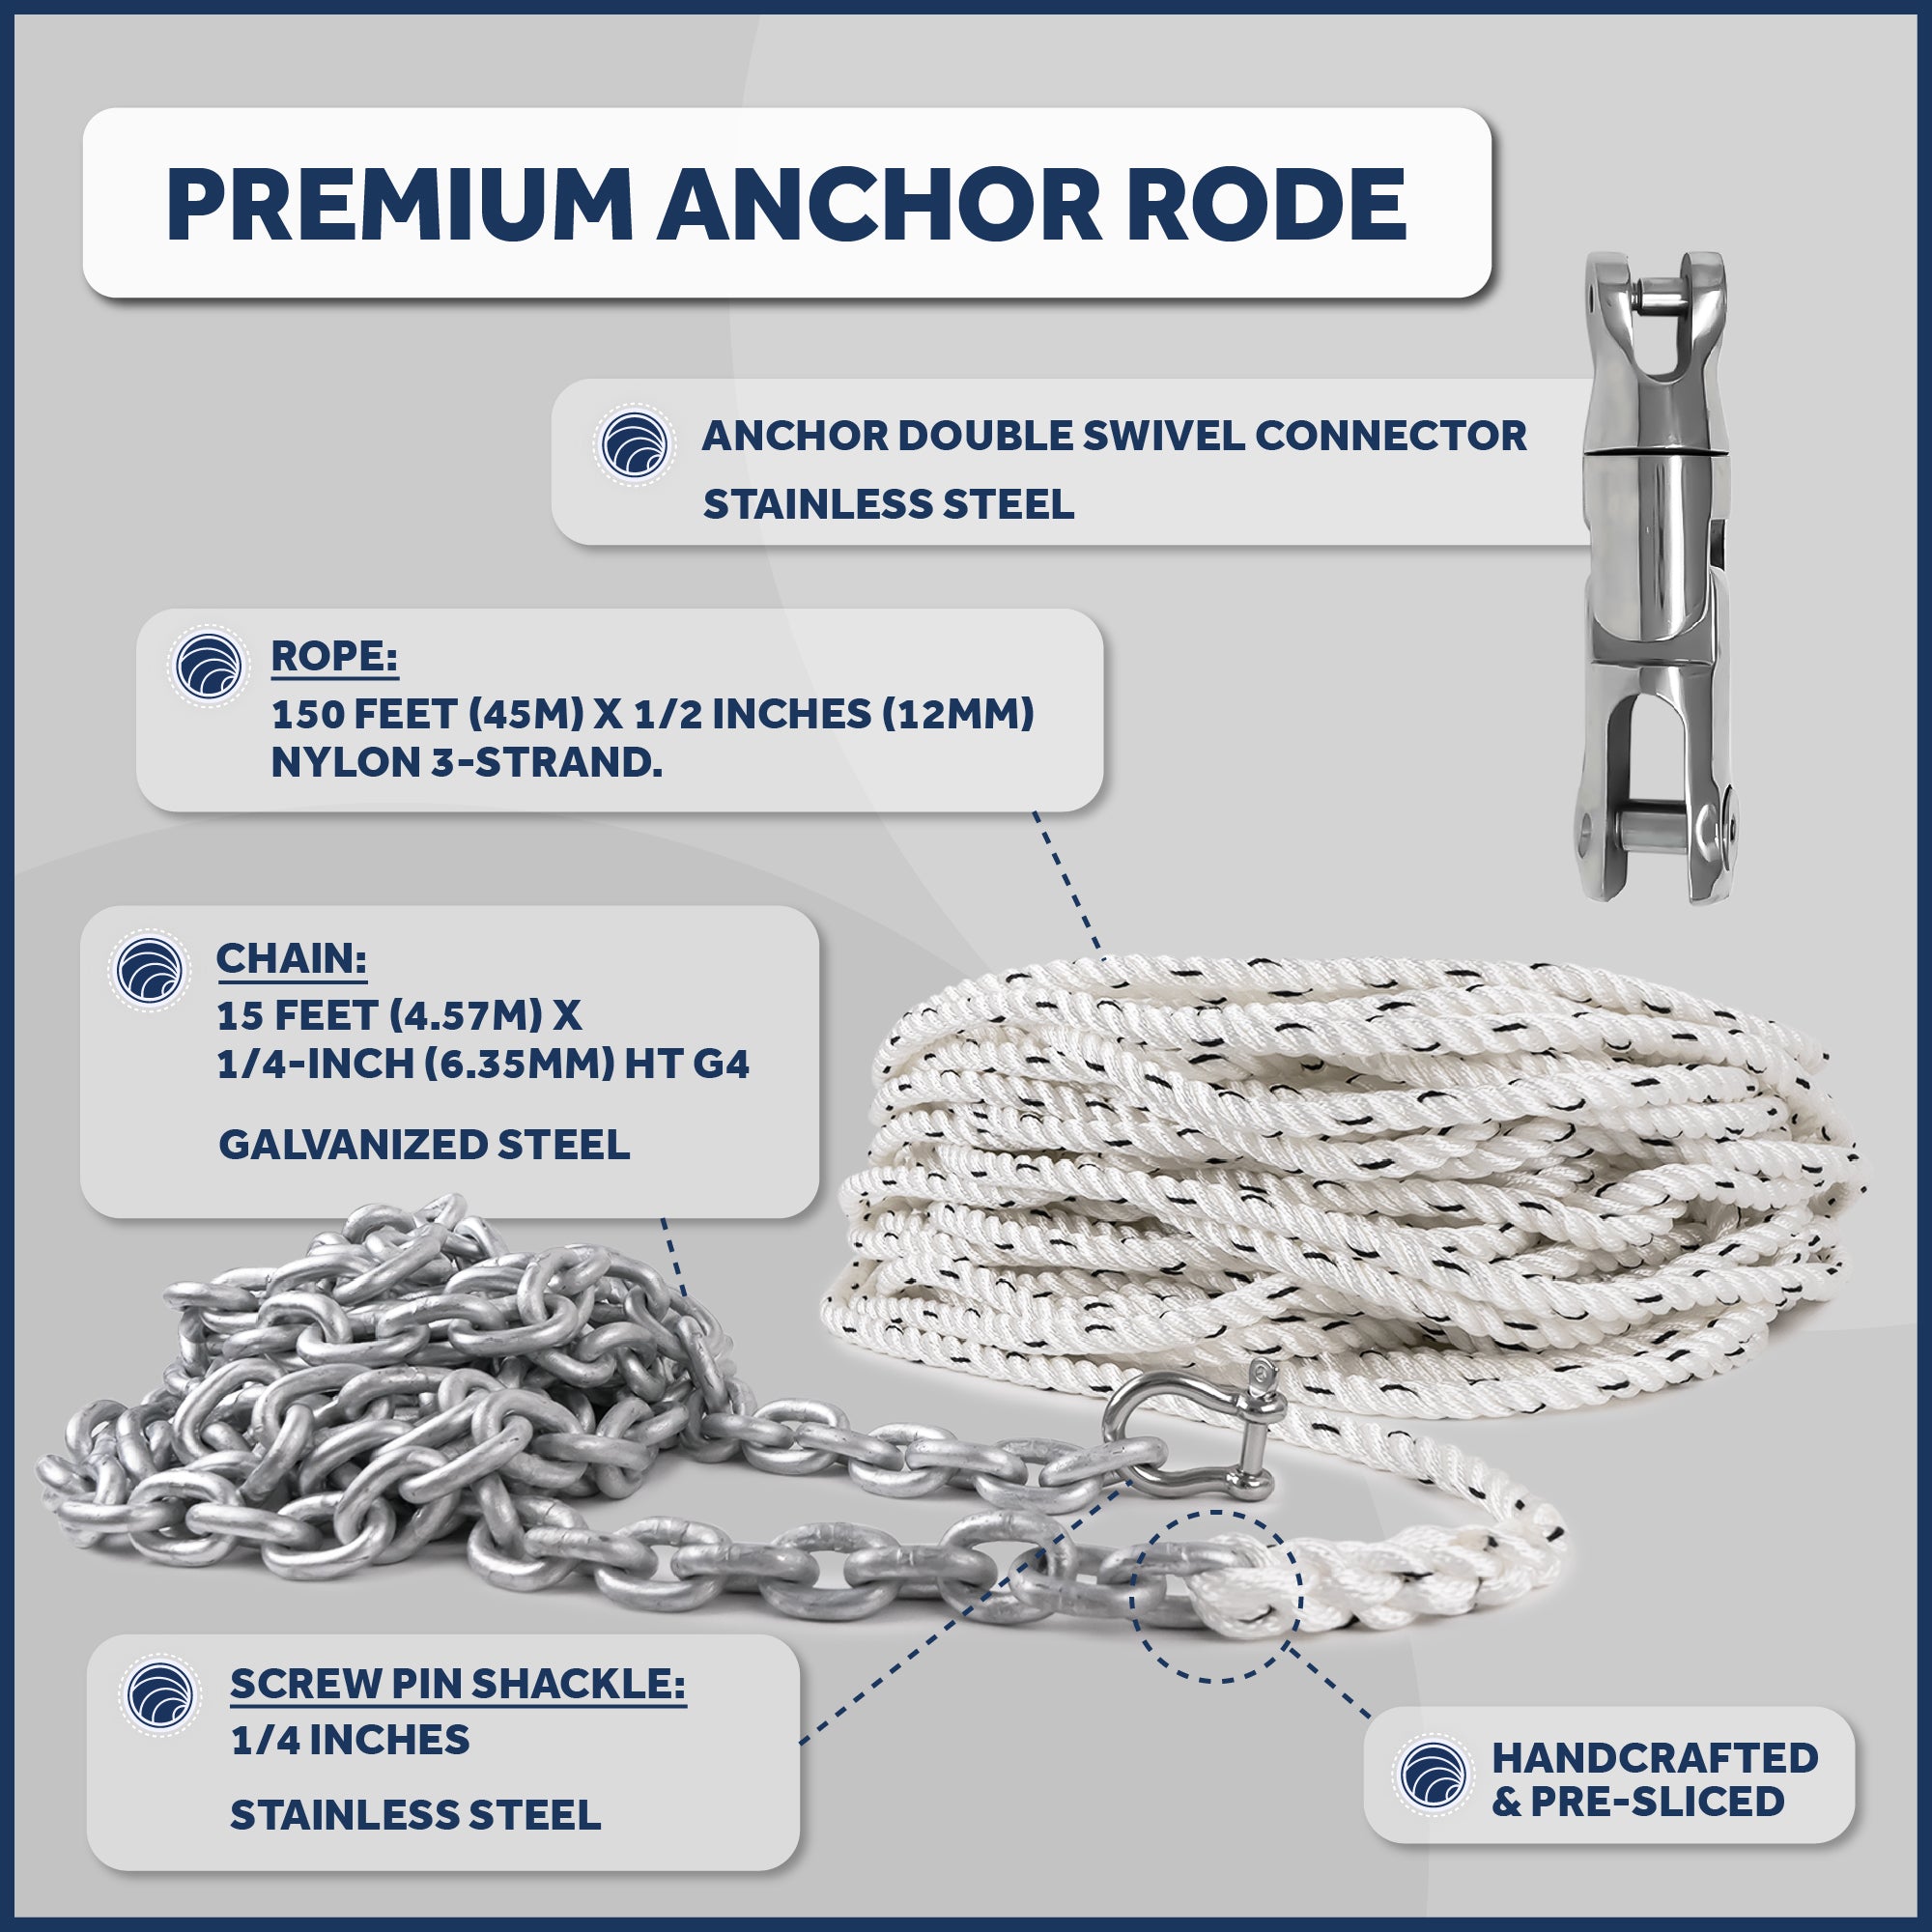 Pacific Windlass Kit, Vertical 600 Watts, 12V DC, 3-Strand Rope, Galvanized Steel HT G4 Chain, Swivel and Shackle - FO3931-C1